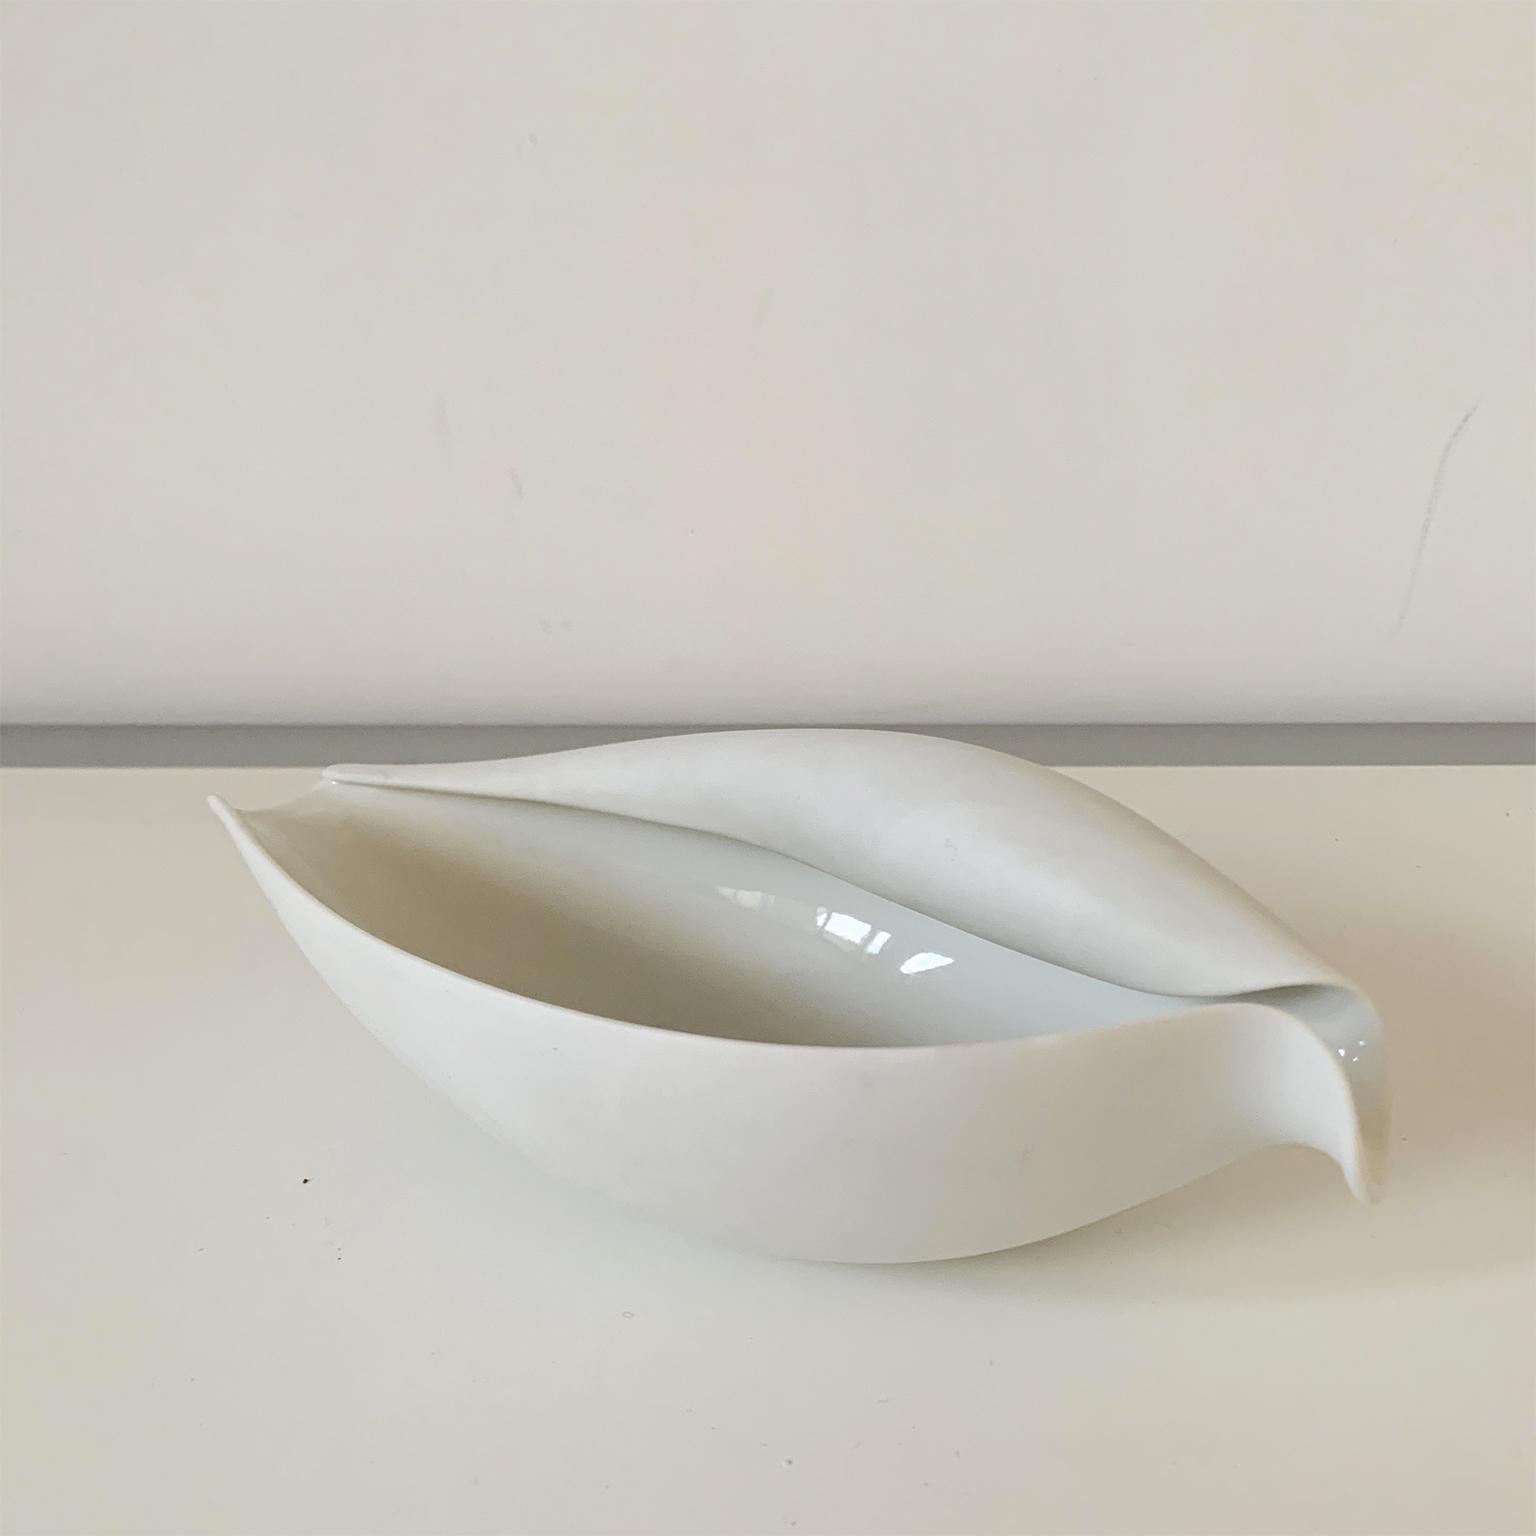 Ted Muehling for Nymphenburg porcelain volute bowl. The bowl features a white bisque exterior & glazed interior. 
It measures approximately 7 1/2? x 4? & 2 1/2